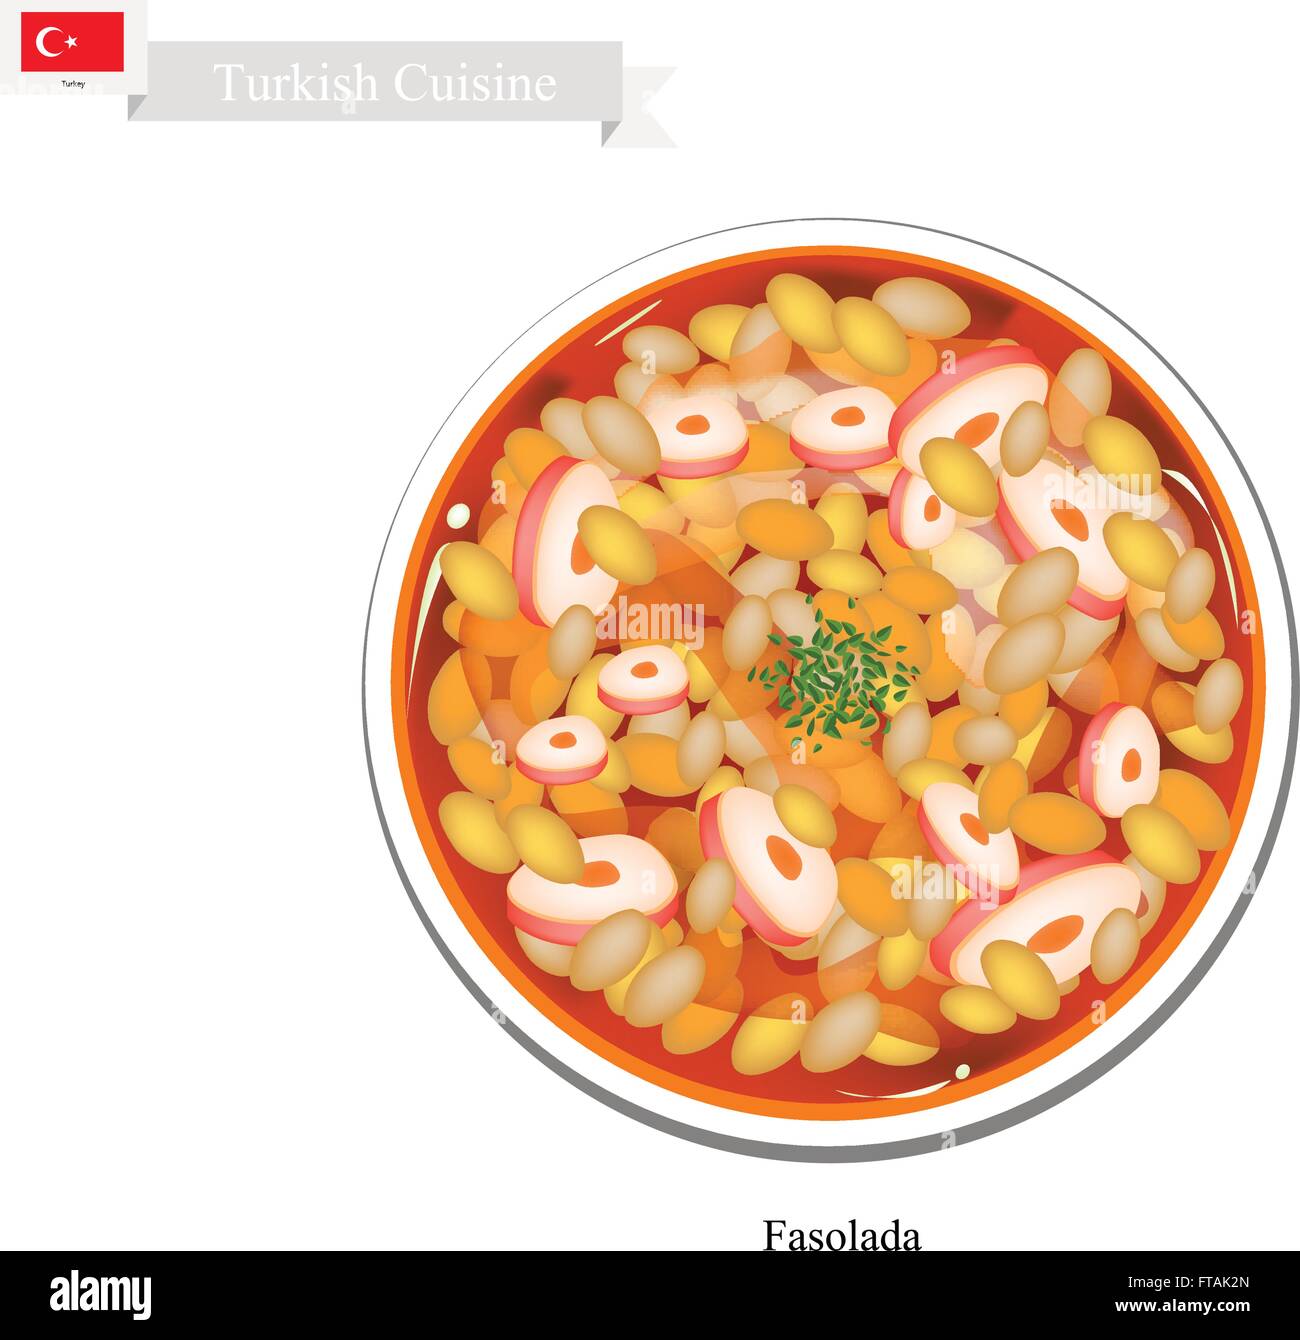 Turkish Cuisine, Fasolada or Bean Soup made with Cannellini Beans, Olive Oil and Vegetables. One of Most Popular Dish in Turkey. Stock Vector